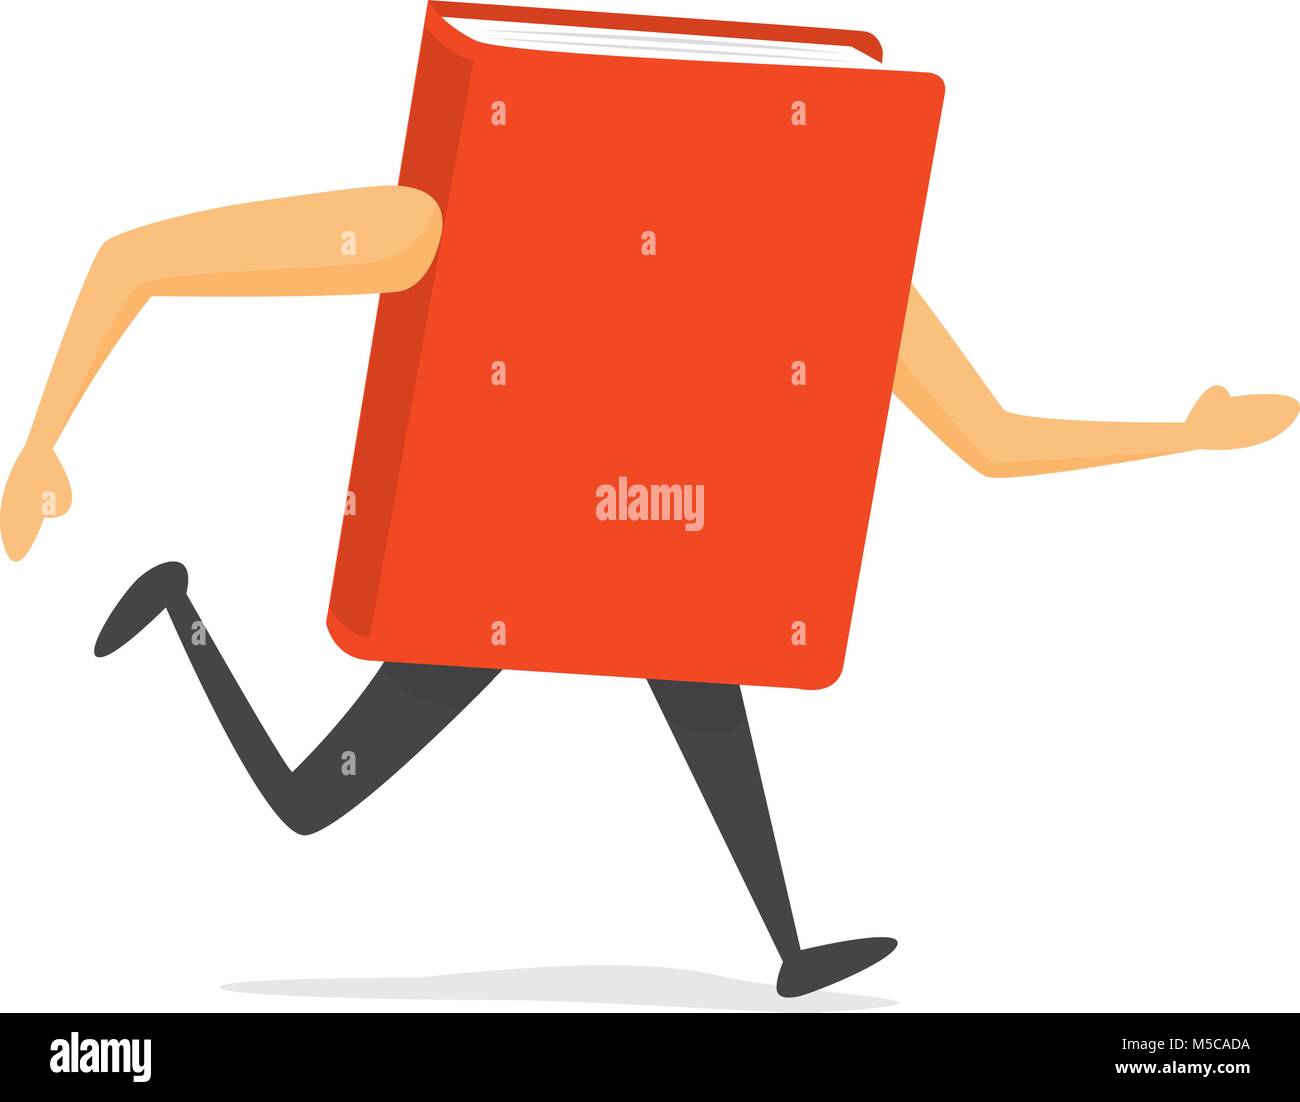 Cartoon illustration of red book running or in a hurry Stock Vector